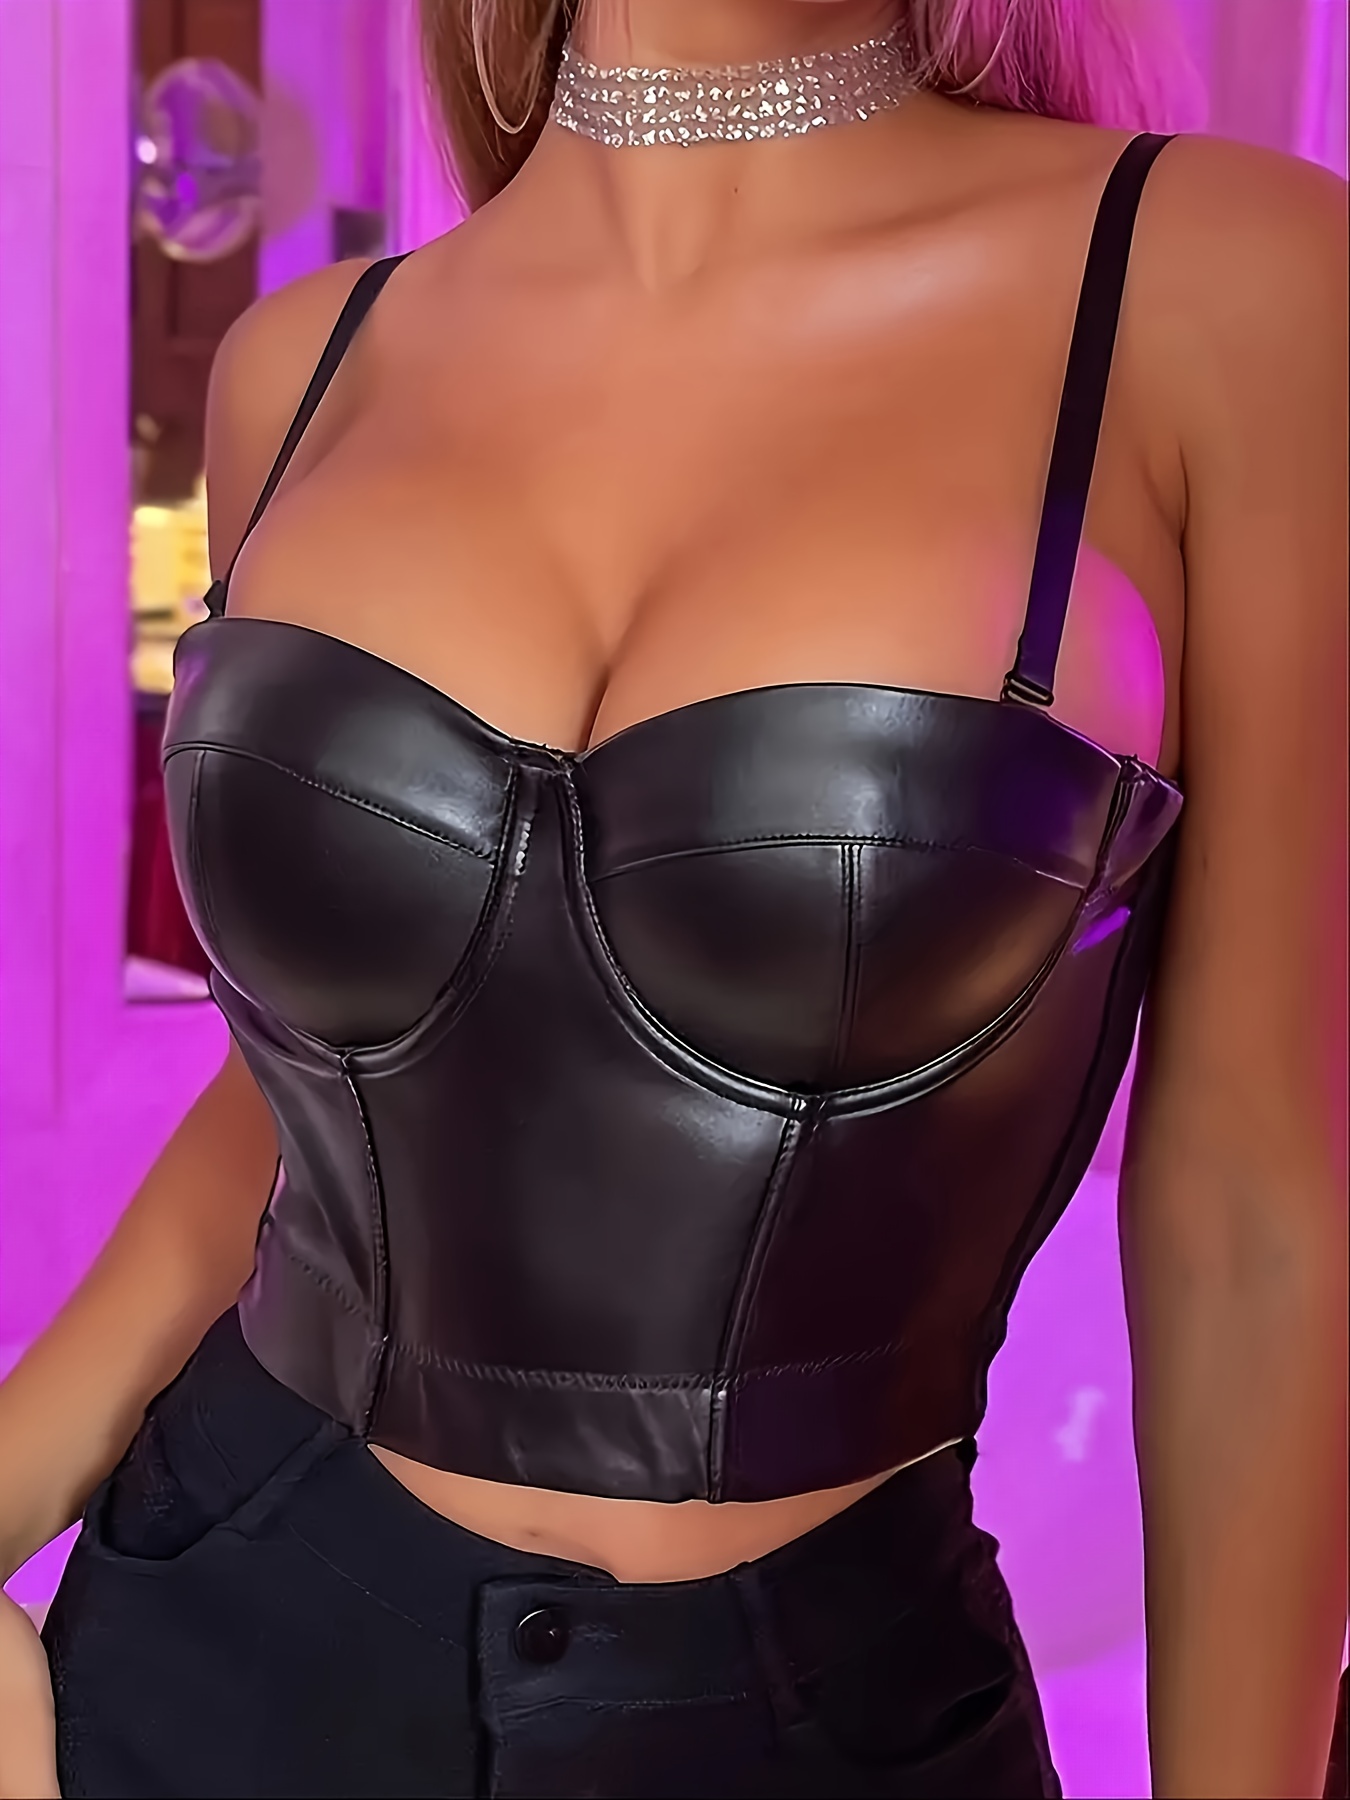 MISS MOLY Womens PU Leather Bustier Crop Top Gothic Punk Push Up Women's  Corset Top Bra